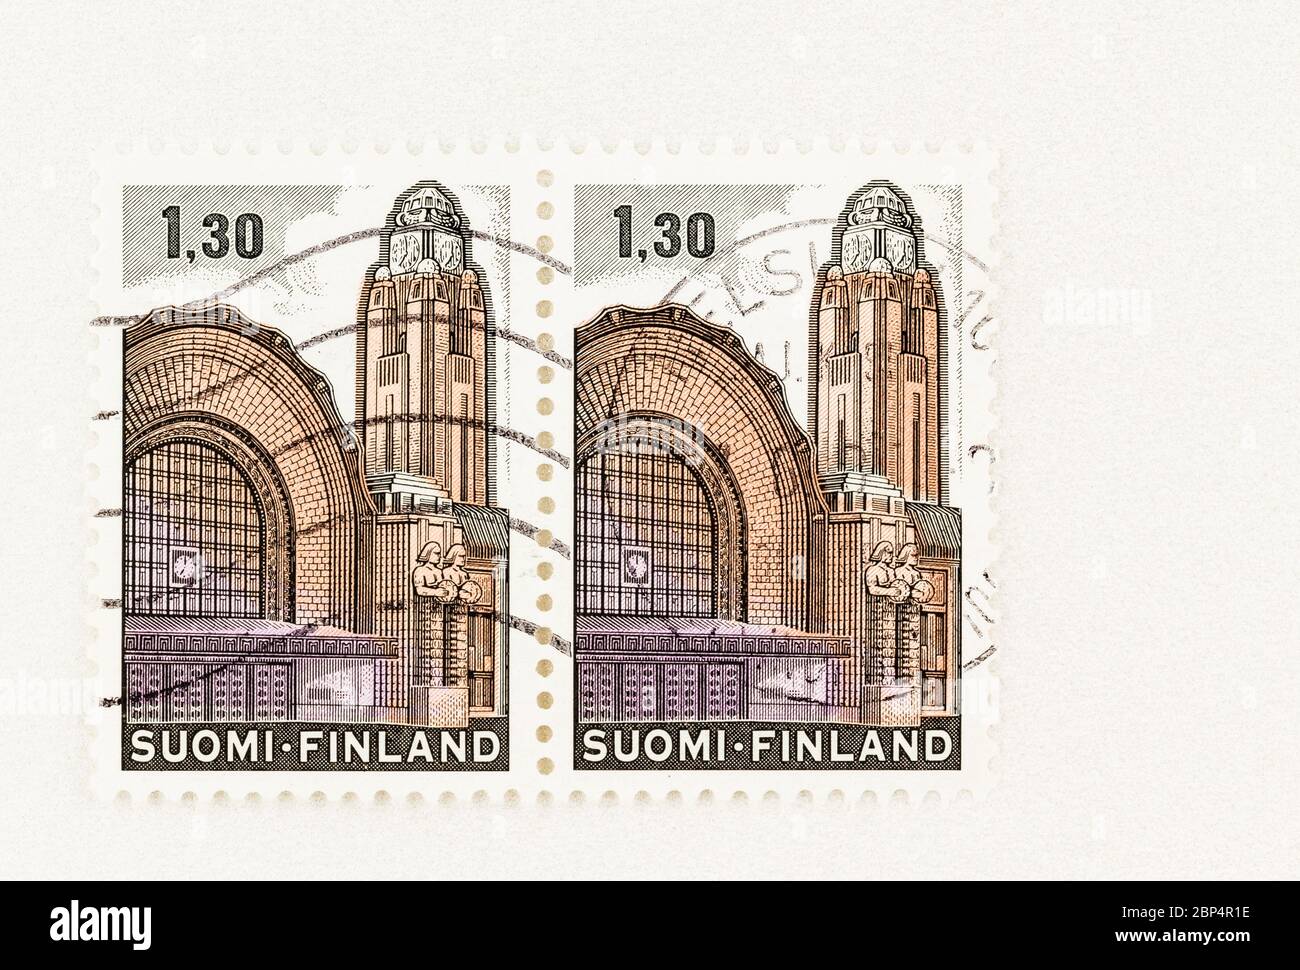 SEATTLE WASHINGTON - May 16, 2020:  1980 Finland stamp featuring Helsinki Railway Station without green color. Stock Photo